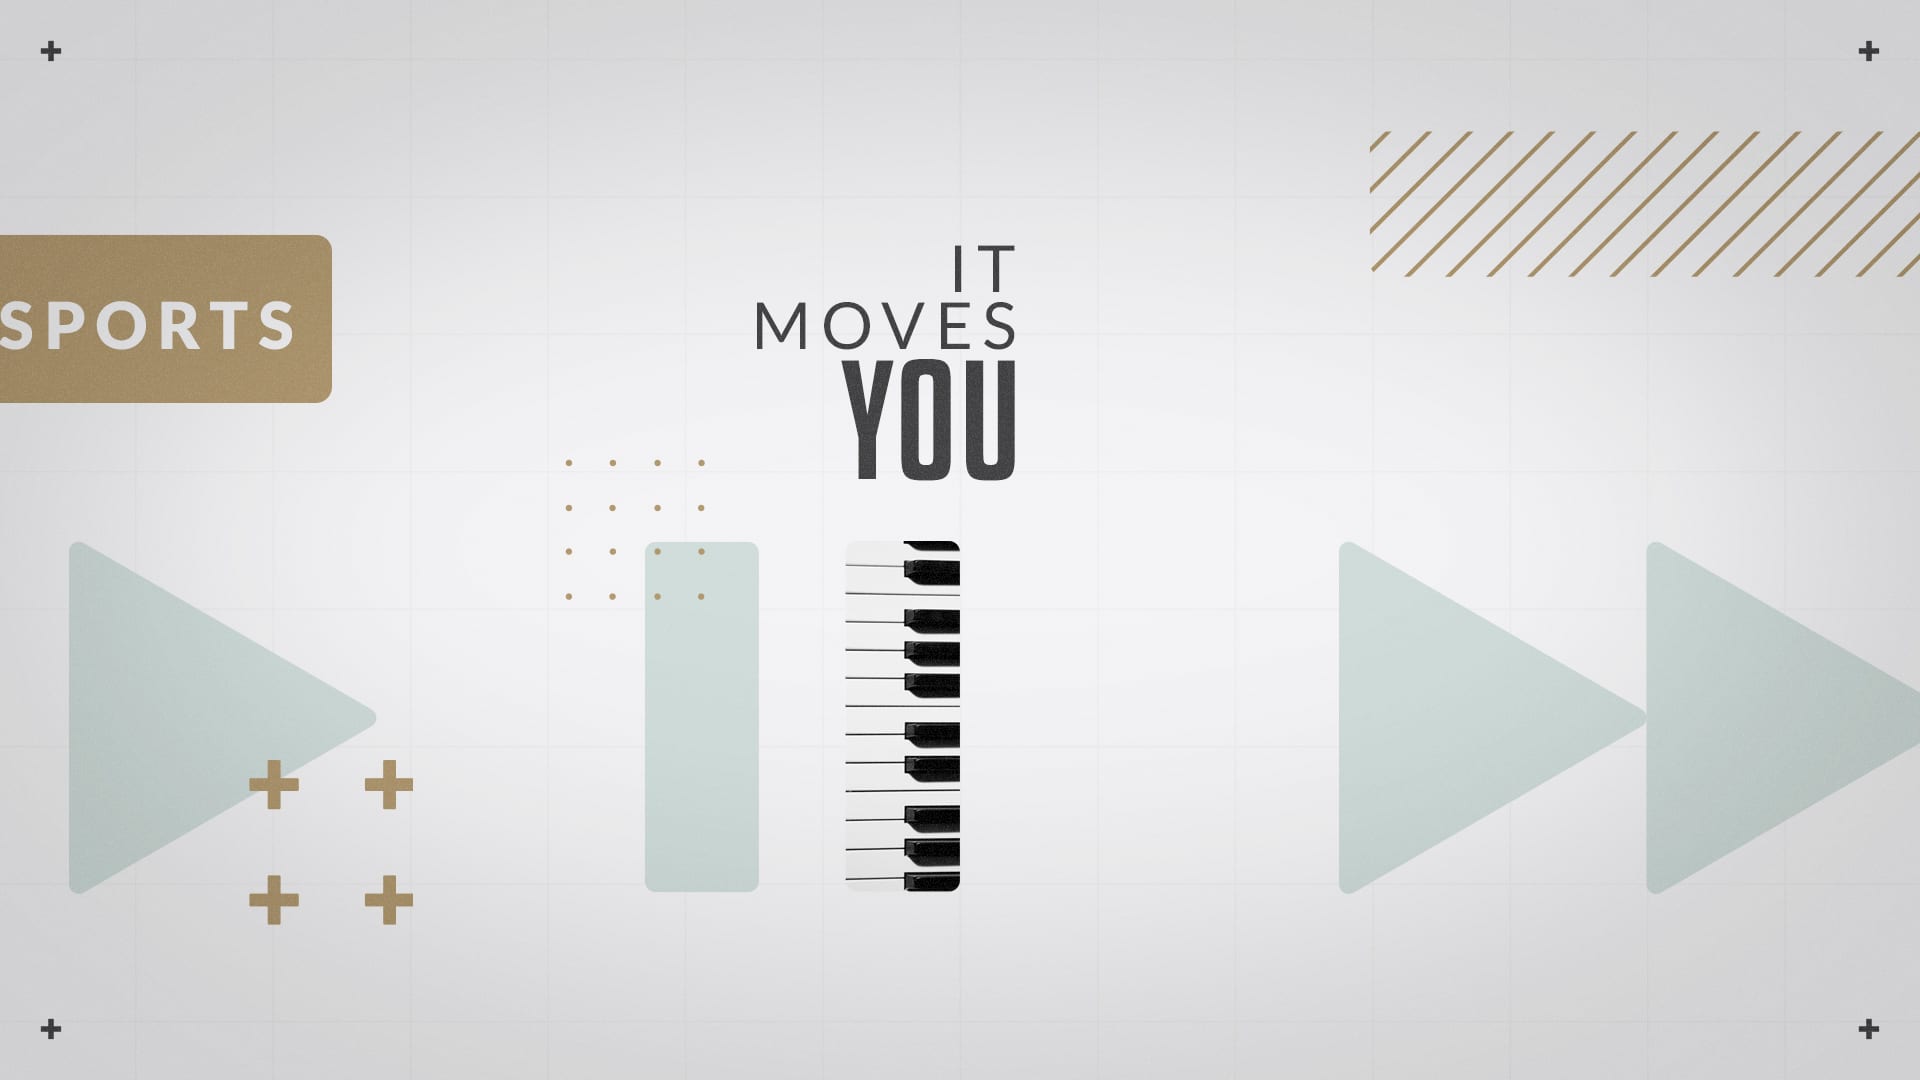 B07 – It moves you